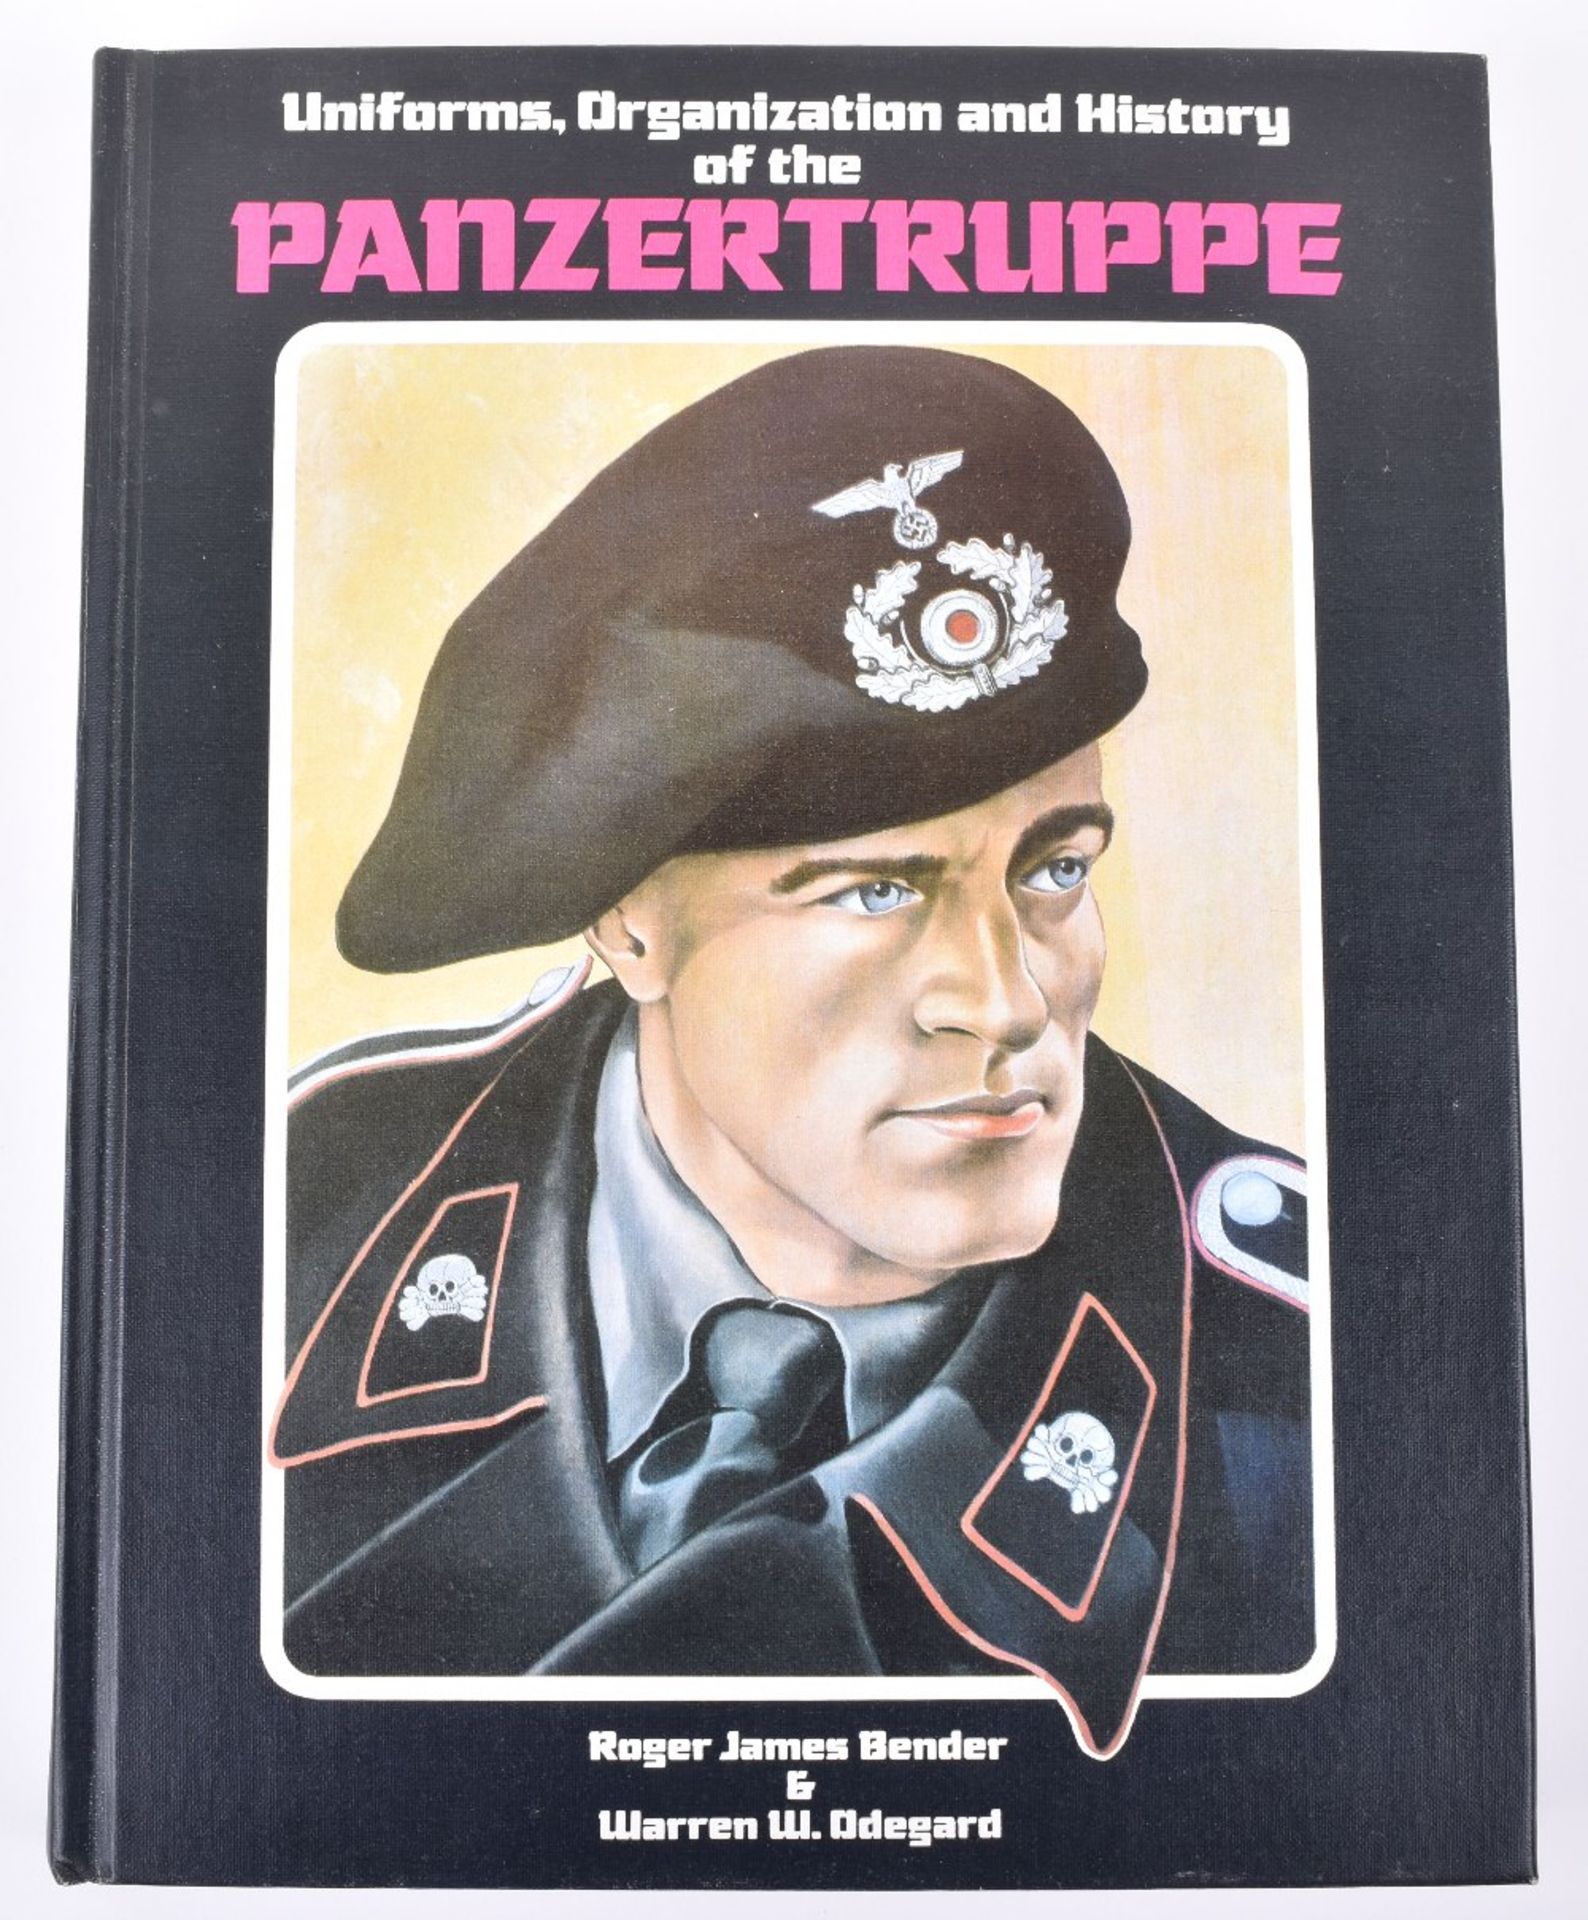 Uniforms Organisation and History of the Panzertruppe by Bender & Odegard